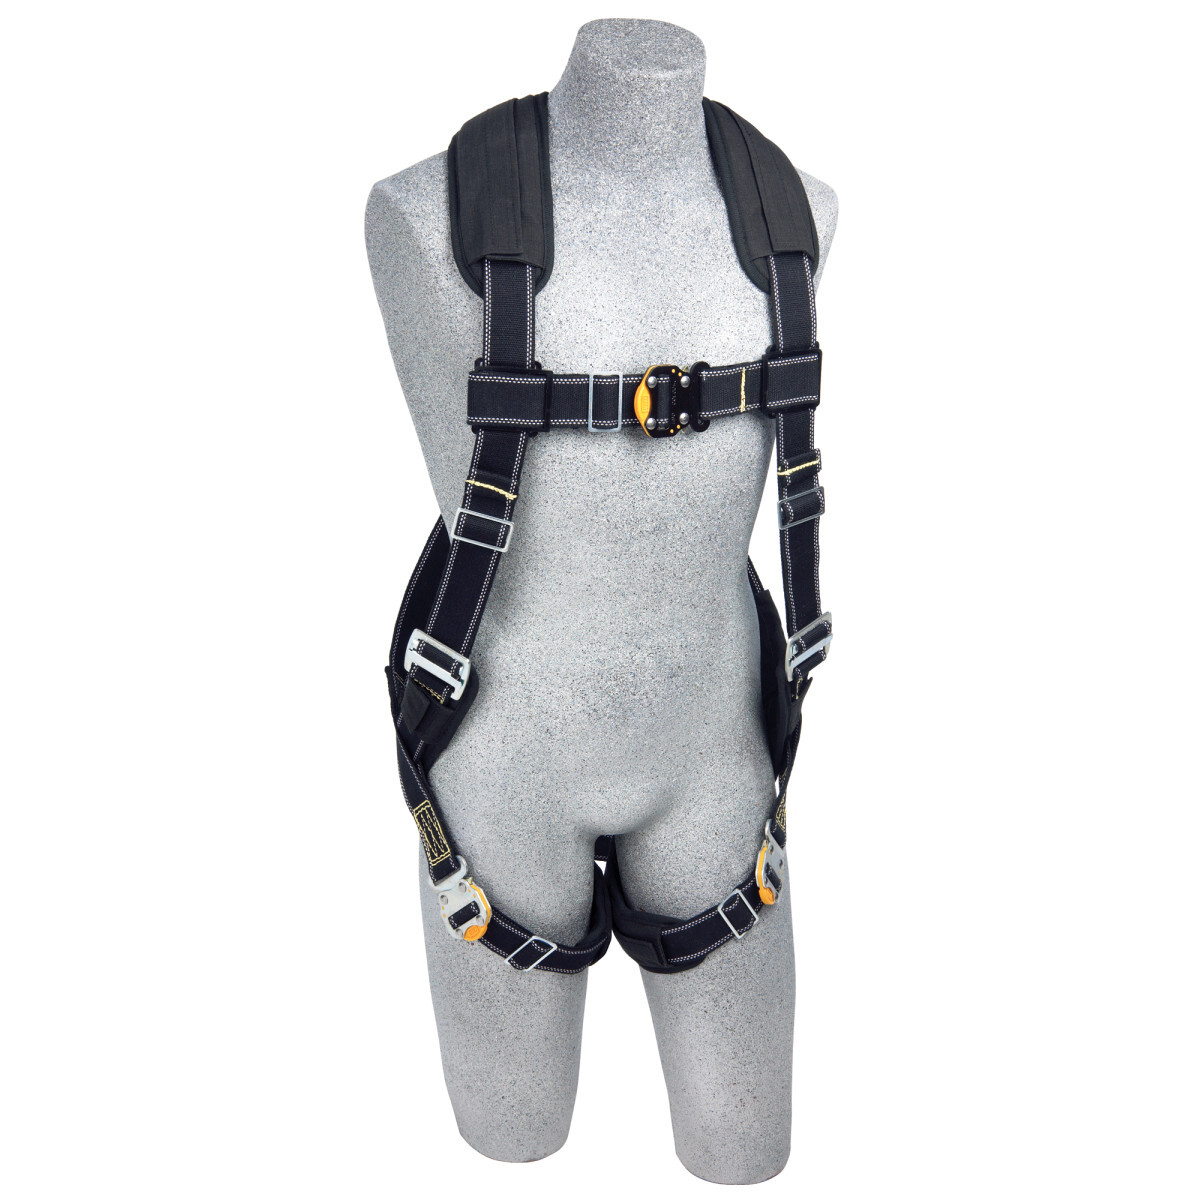 3M™ DBI-SALA® 2X ExoFit™ XP Arc Flash Harness With Quick Connect Buckle Leg Strap, Comfort Padding And Leather Insulators